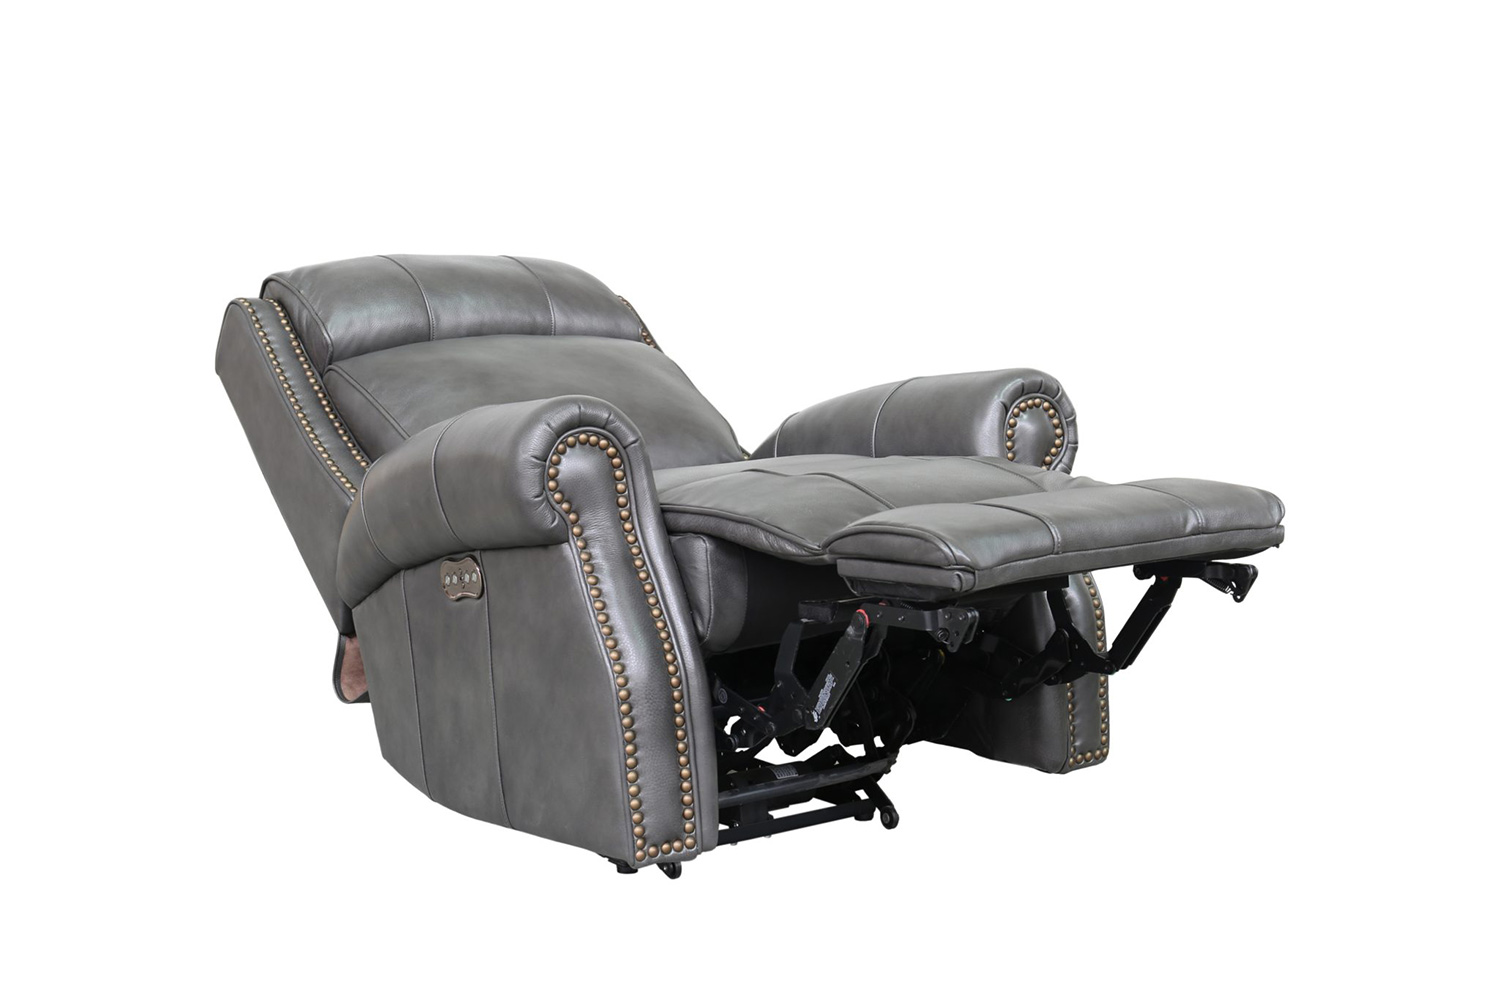 Barcalounger Blair Big and Tall Power Recliner Chair with Power Head Rest - Wrenn Gray/all leather